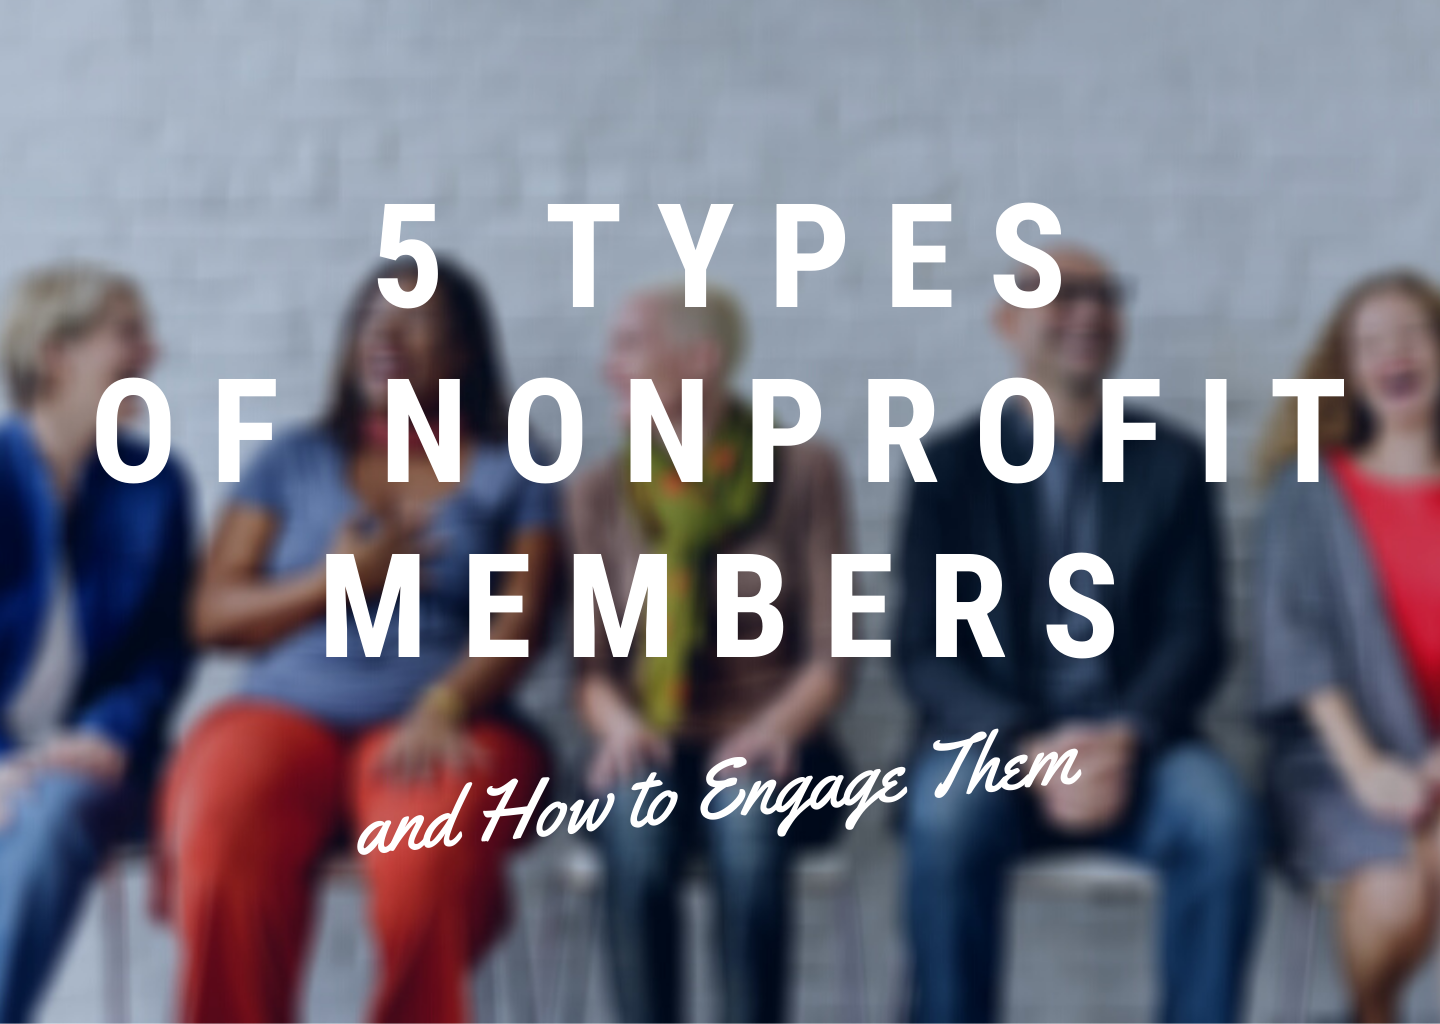 5 Types of Nonprofit Members and How to Engage Them